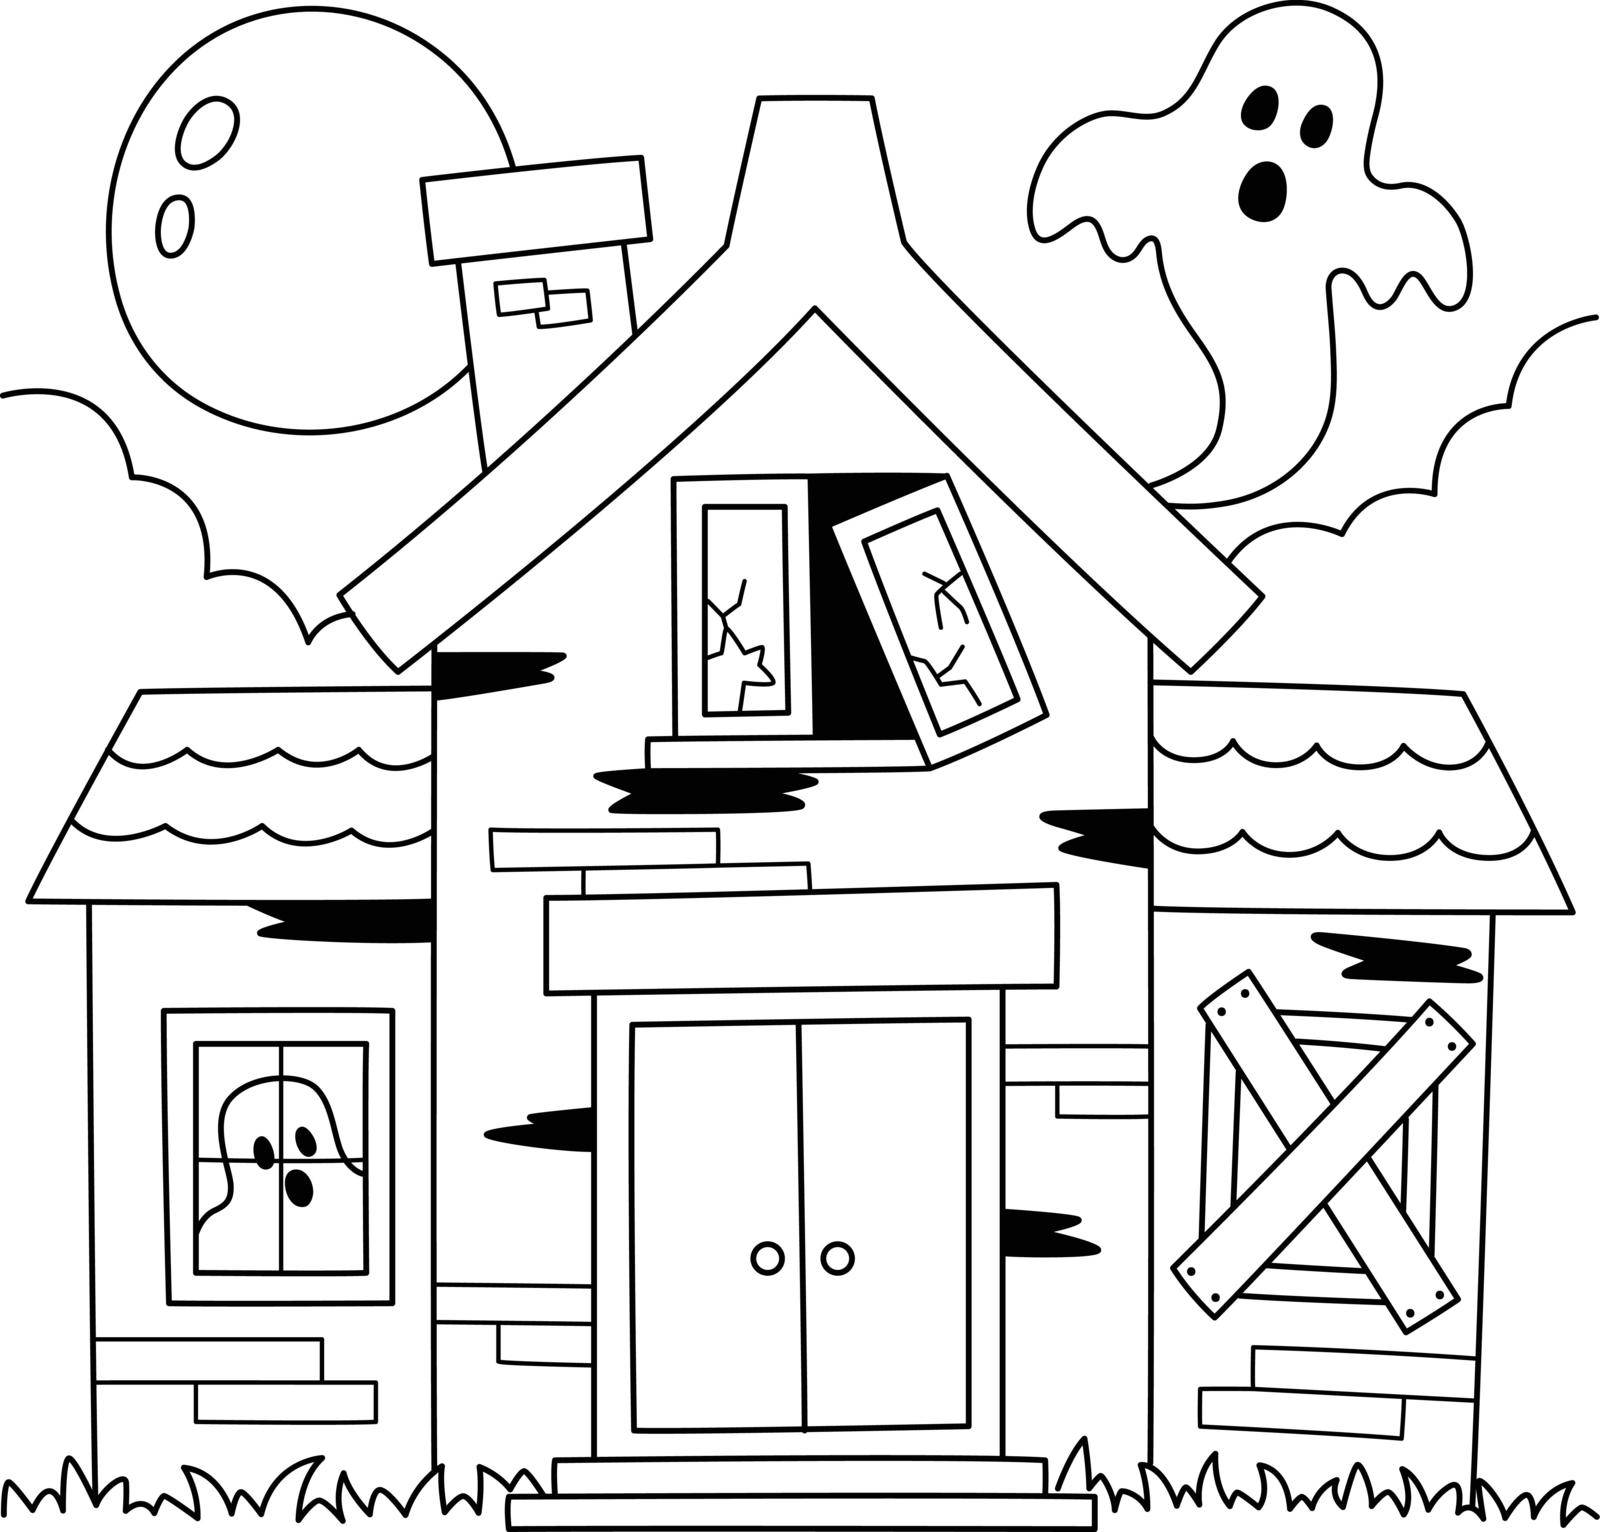 A cute and funny coloring page of a haunted house on Halloween. Provides hours of coloring fun for children. To color, this page is very easy. Suitable for little kids and toddlers.